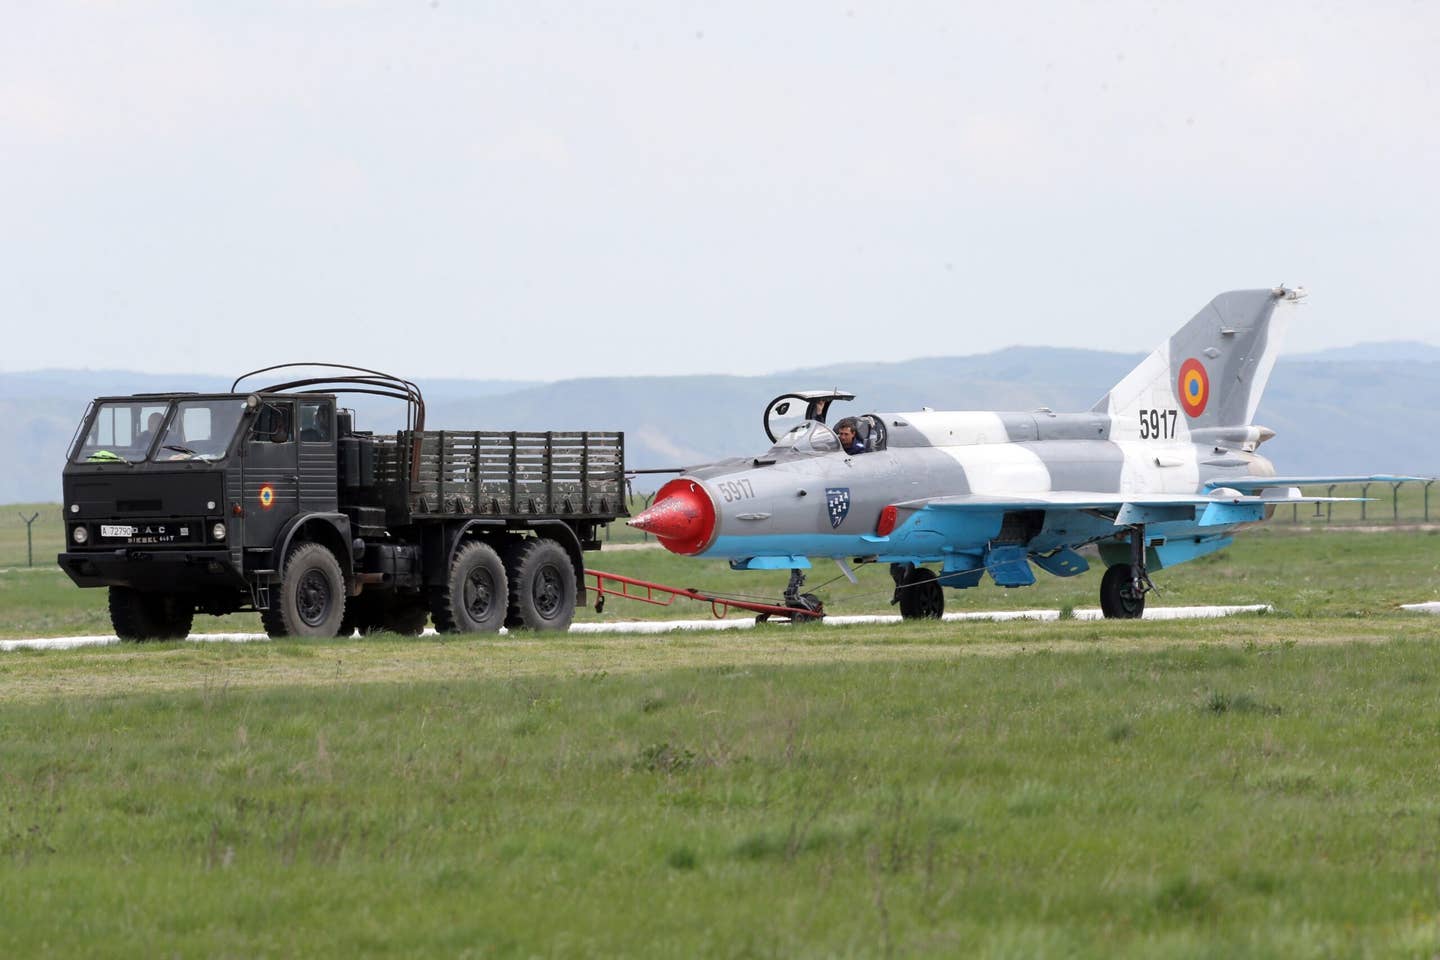 Romanian Air Force ground crew move a MiG-21 LanceR at the 71st Air Base in Campia Turzii, Romania, in April 2014. <em>MIRCEA ROSCA/AFP via Getty Images</em>